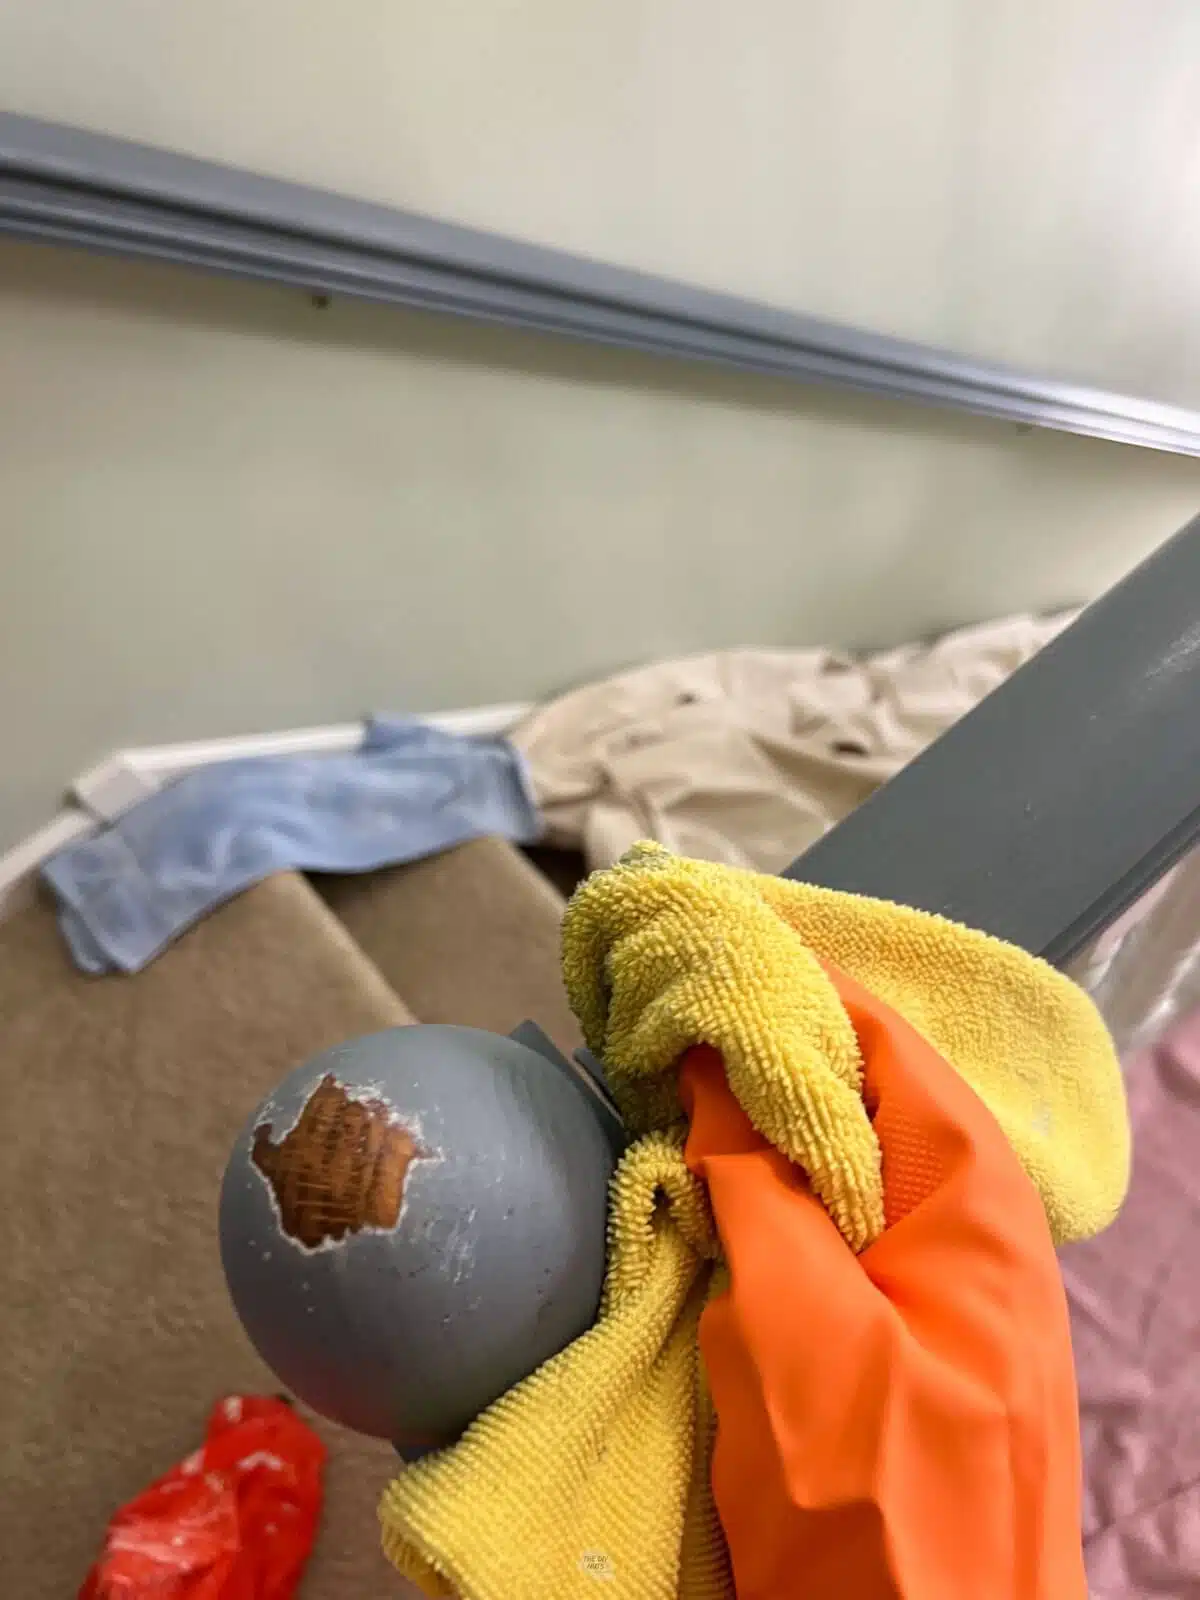 hand wearing orange rubber glove wiping down painted stair railing with yellow rag.